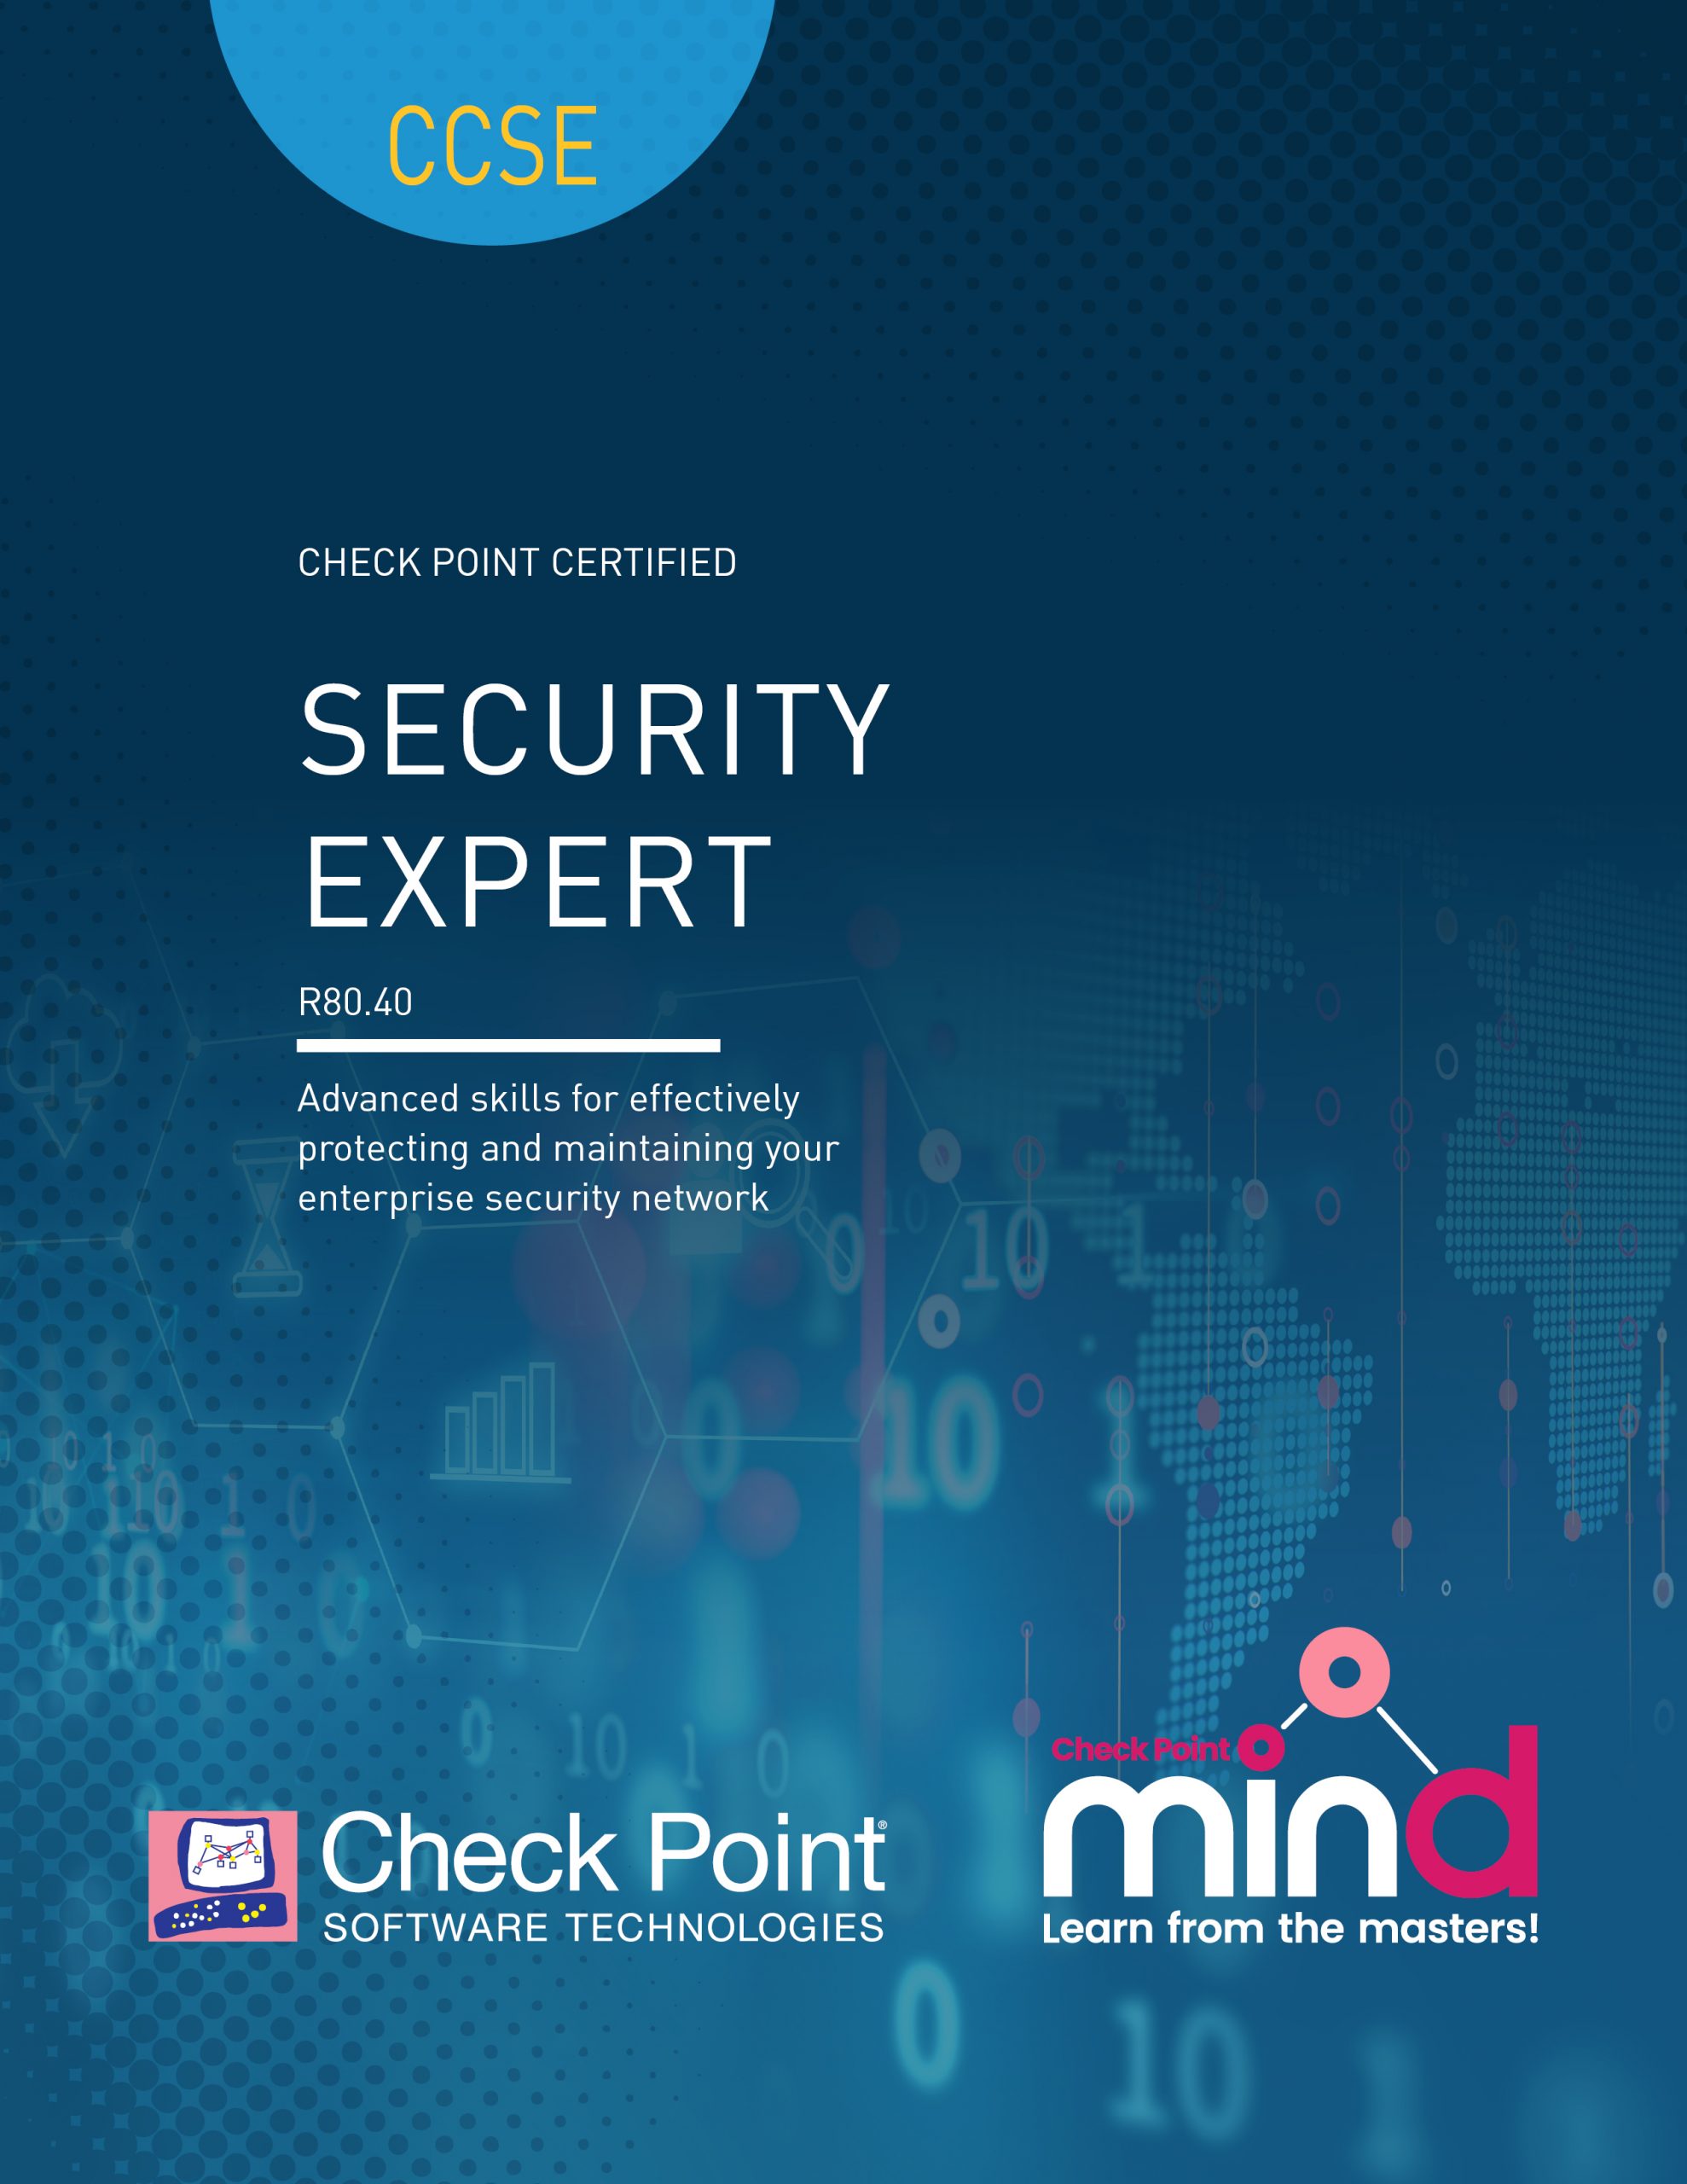 CCSE – Check Point Certified Security Expert (CCSE) version R81.10